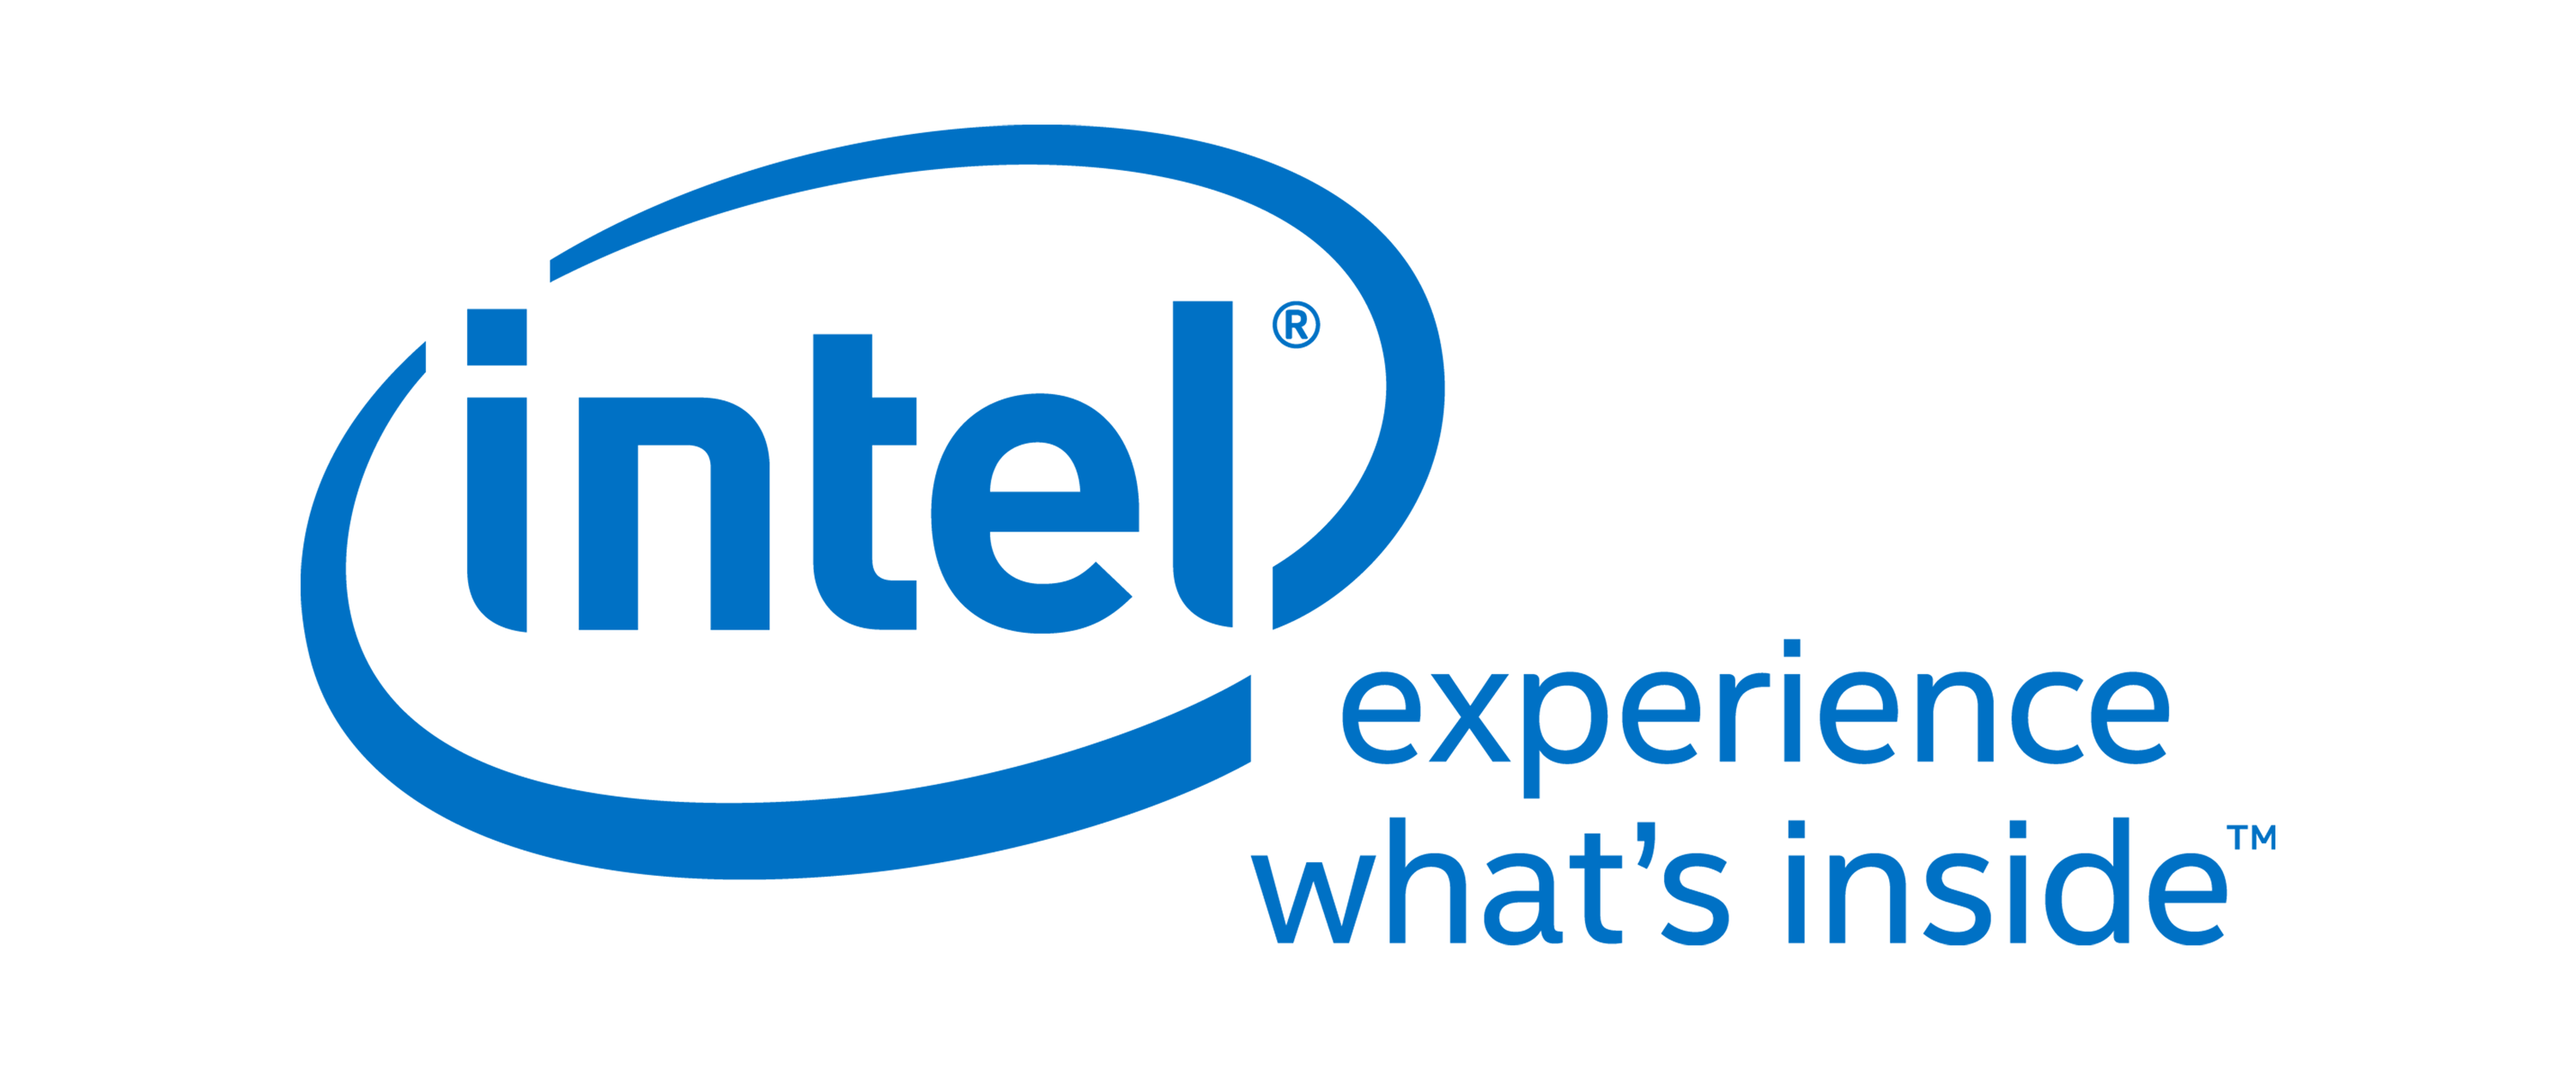 Intel Experience What's inside